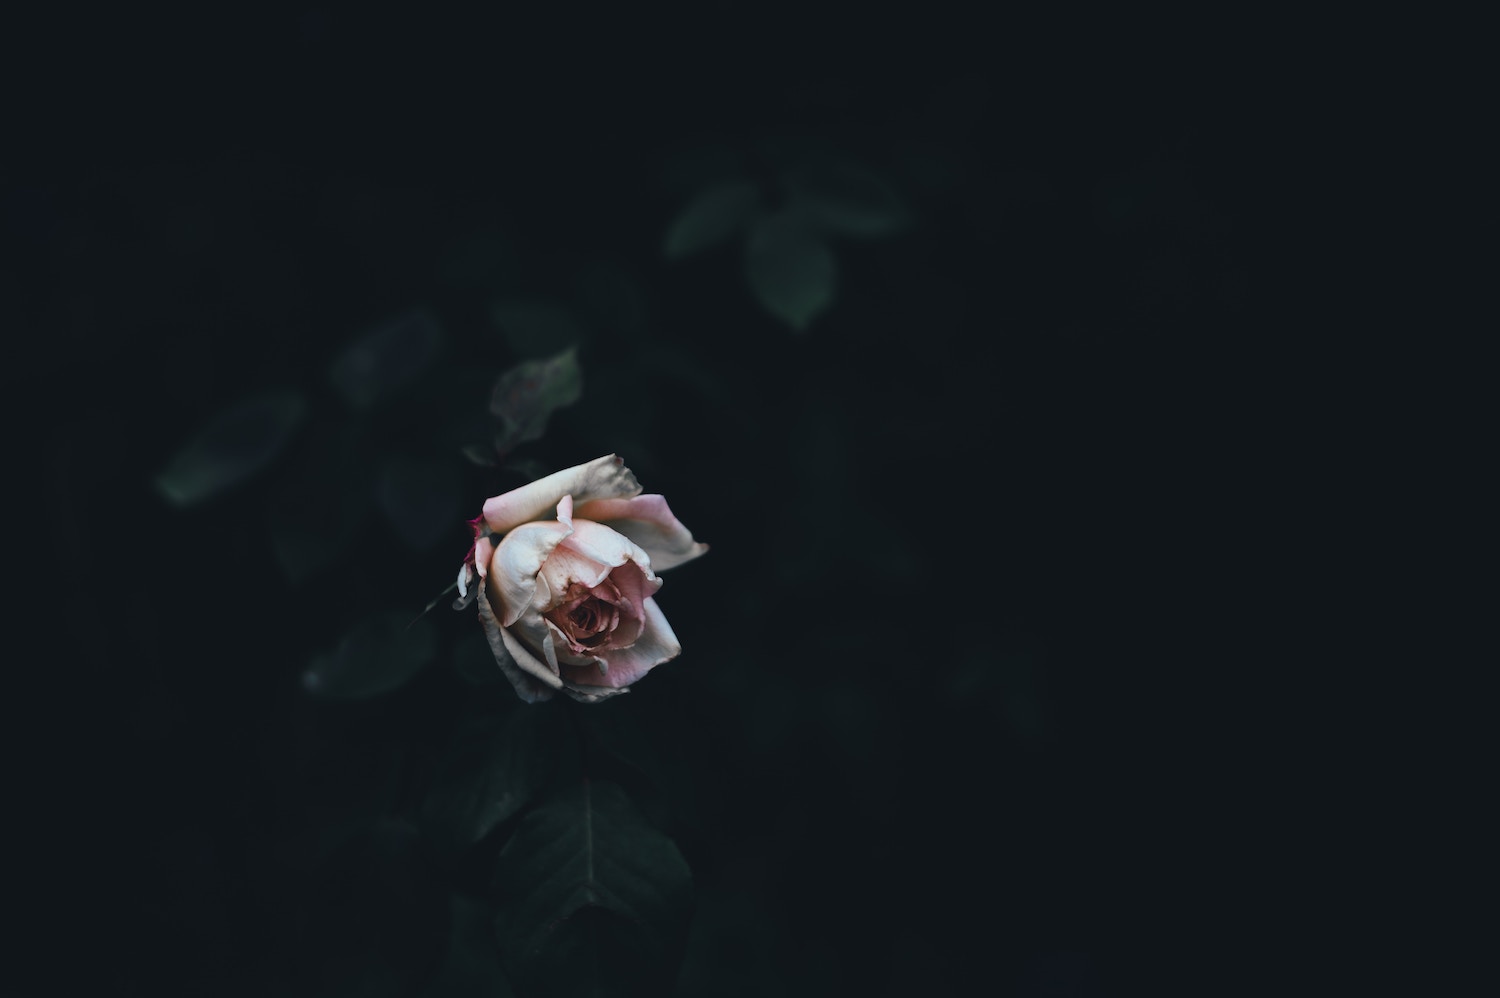 A photo of a blossoming flower in darkness by Annie Spratt